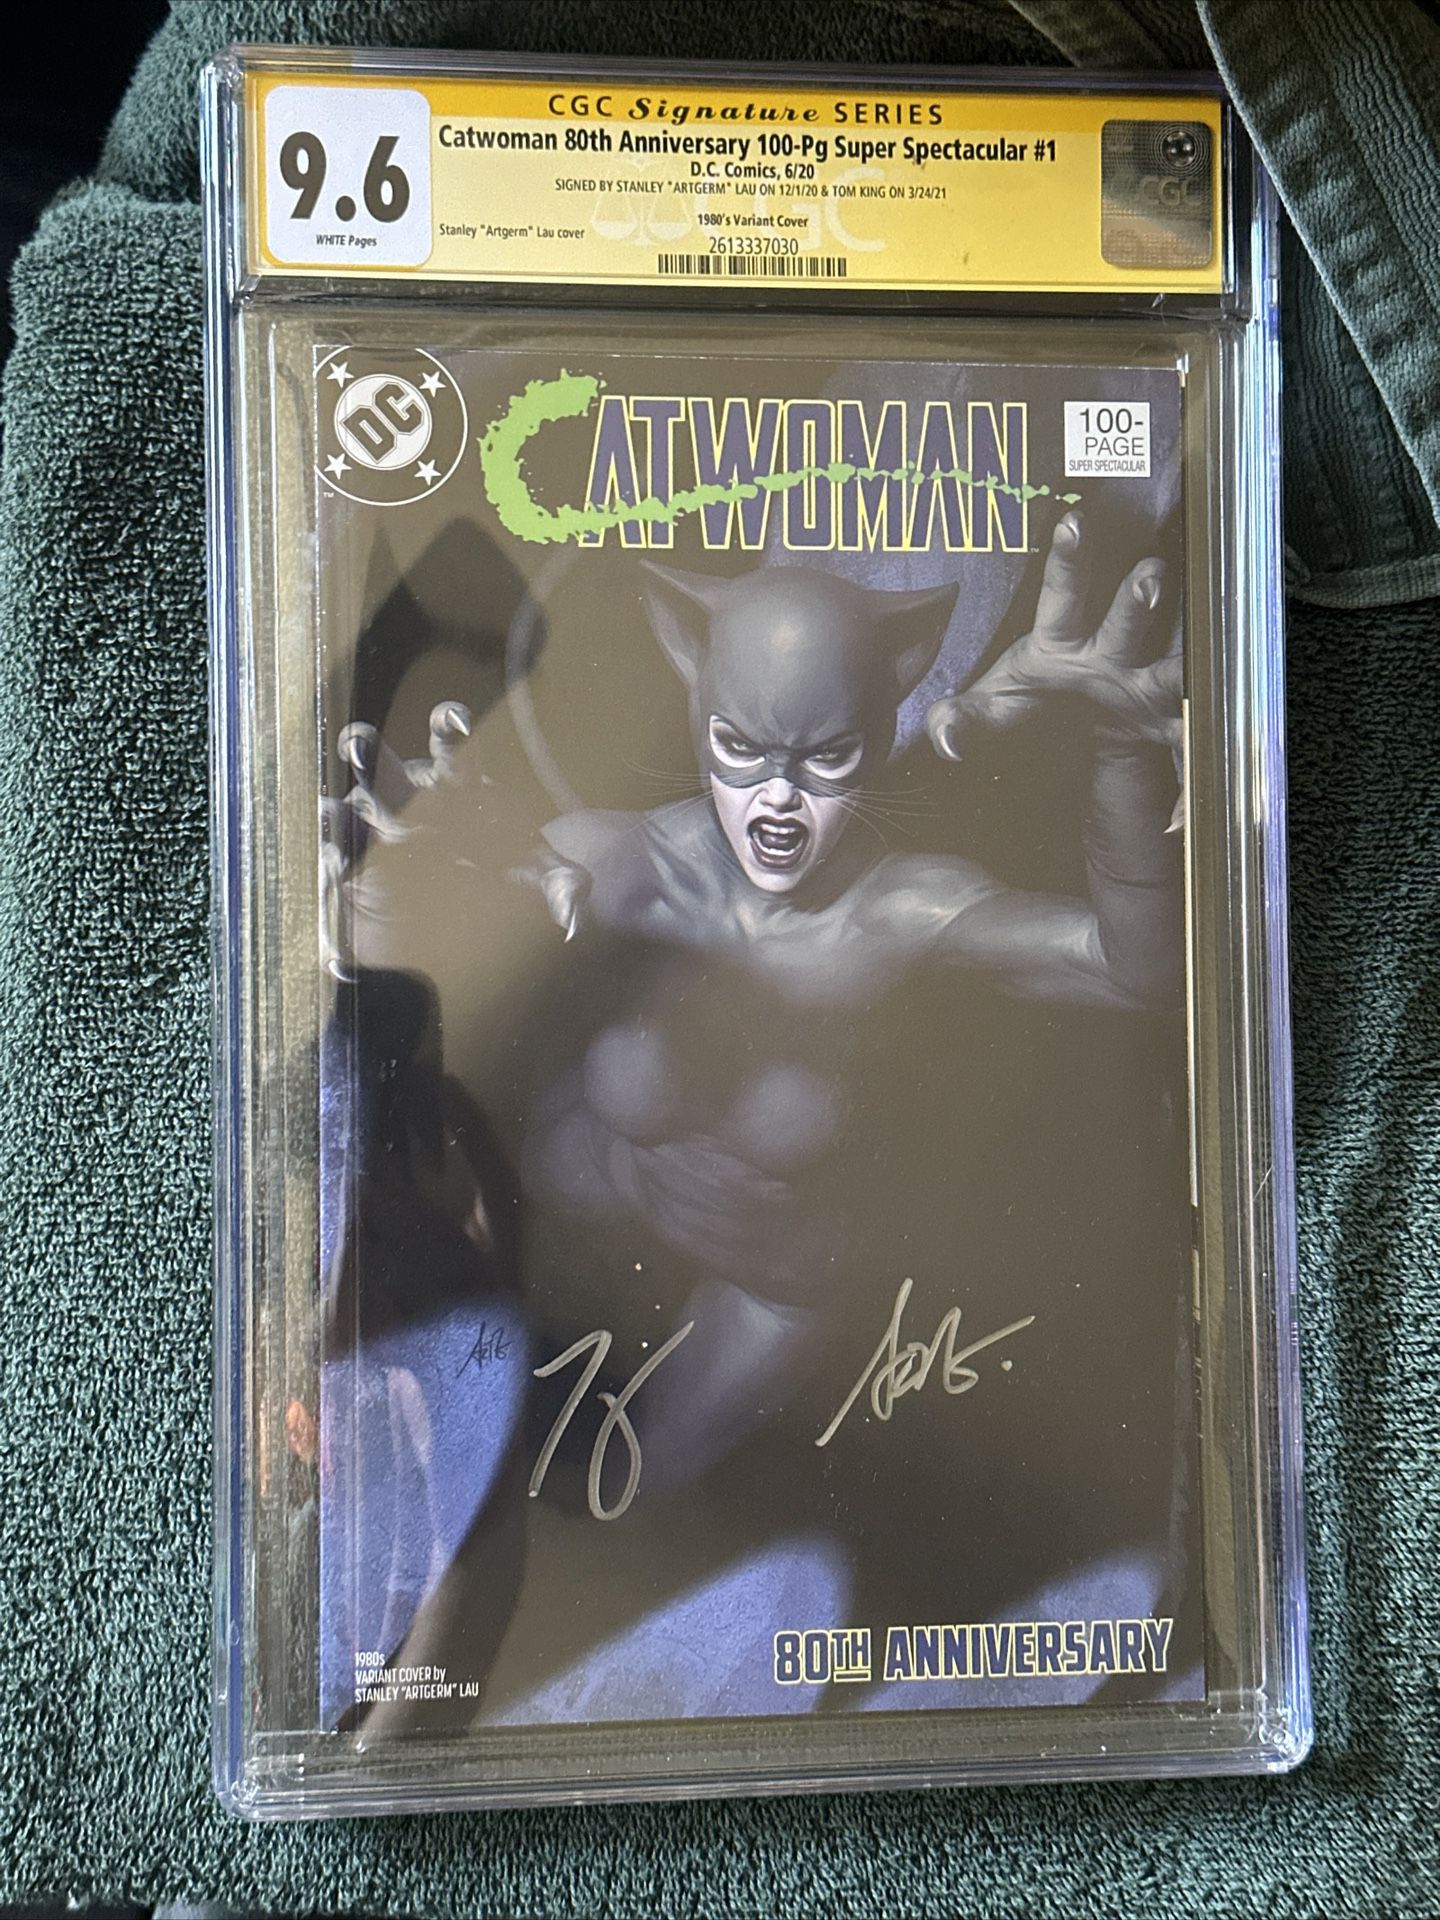 Catwoman Signed CGC